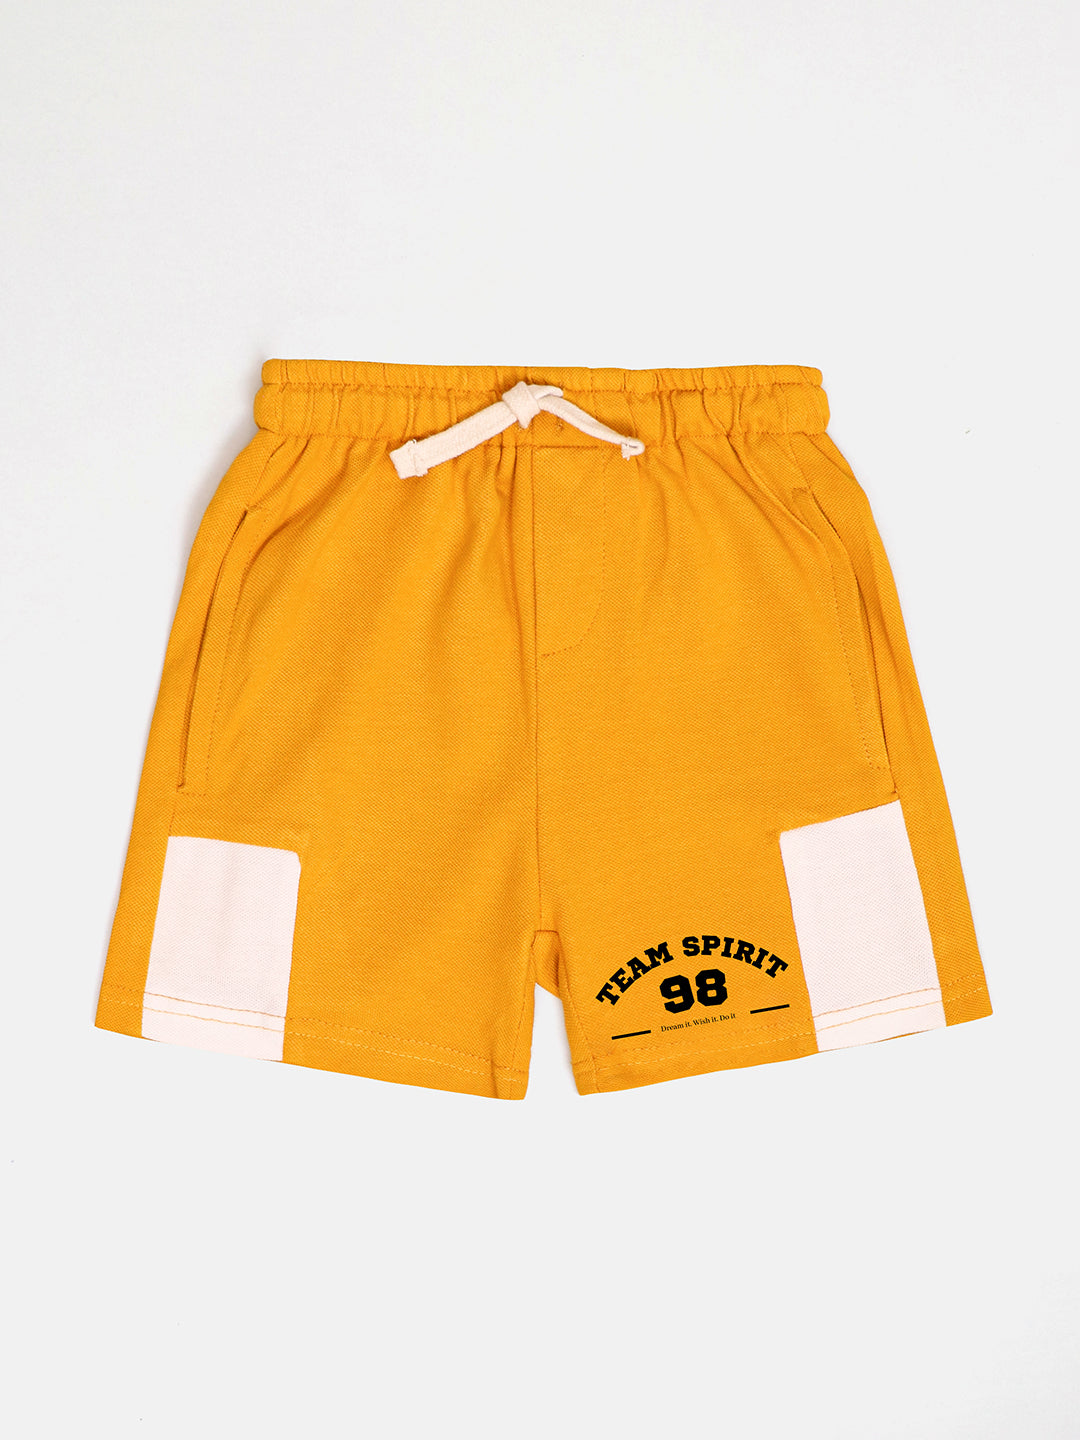 Boys Cotton Shorts Combo- Red, Yellow, Blue